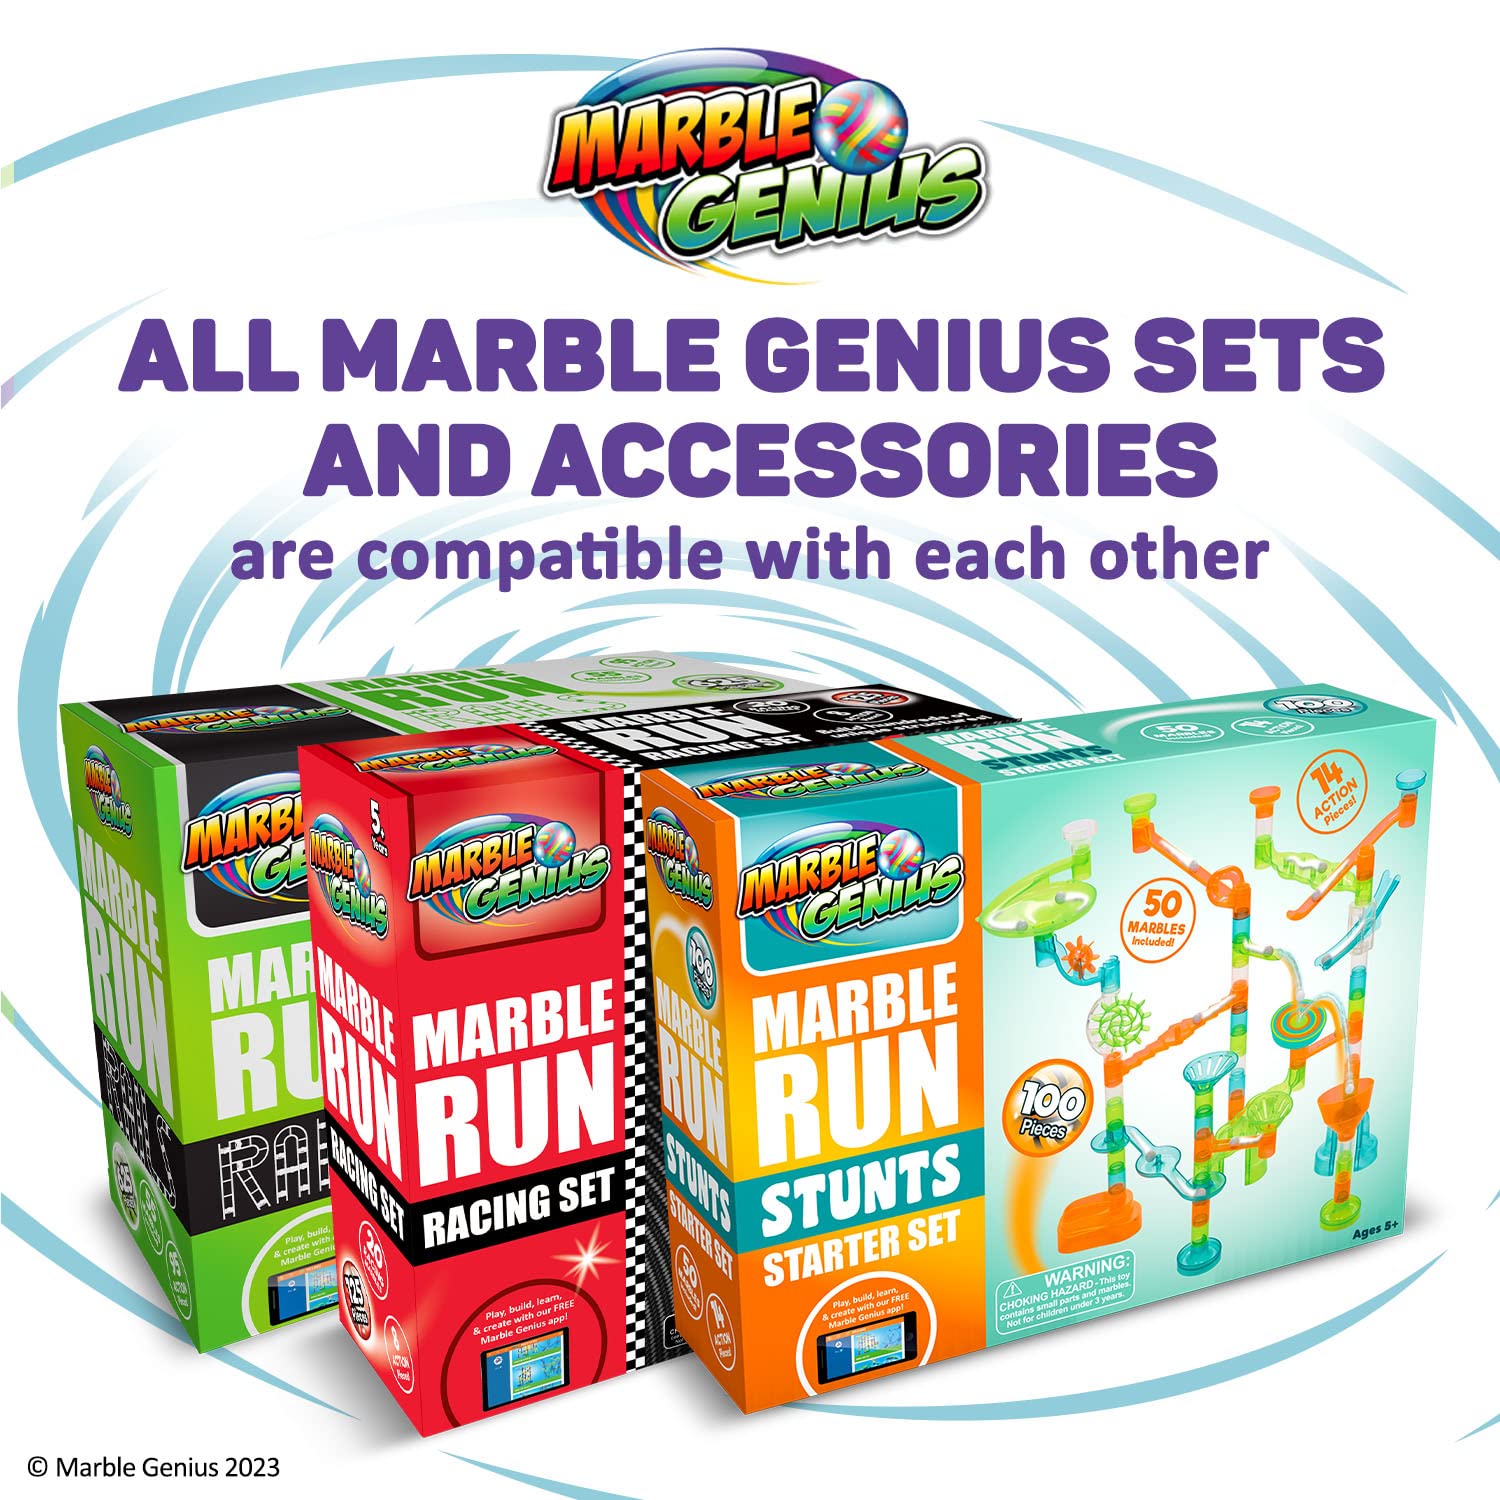 Marble Genius Jumps & Swings 8-pc Accessory Add-On Set: Create Take Your Marble Run to The Next Level, Watch Your Marbles Race Through This Unique & Innovative Add-On, Perfect for Kids & Adults Alike